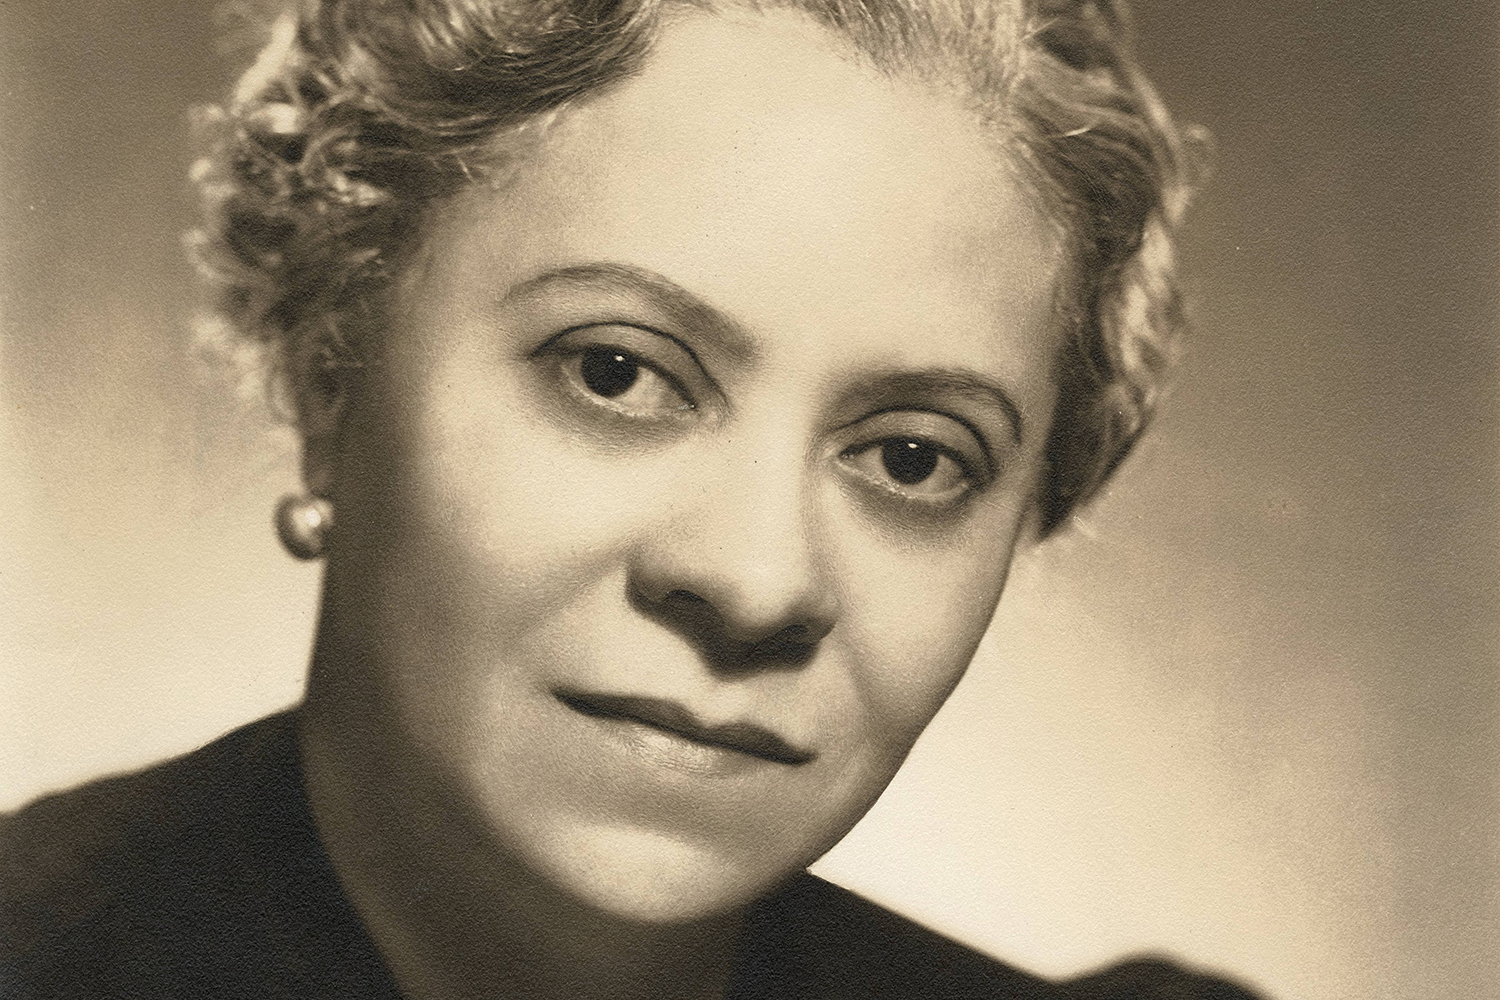 A sepia headshot of composer Florence Price